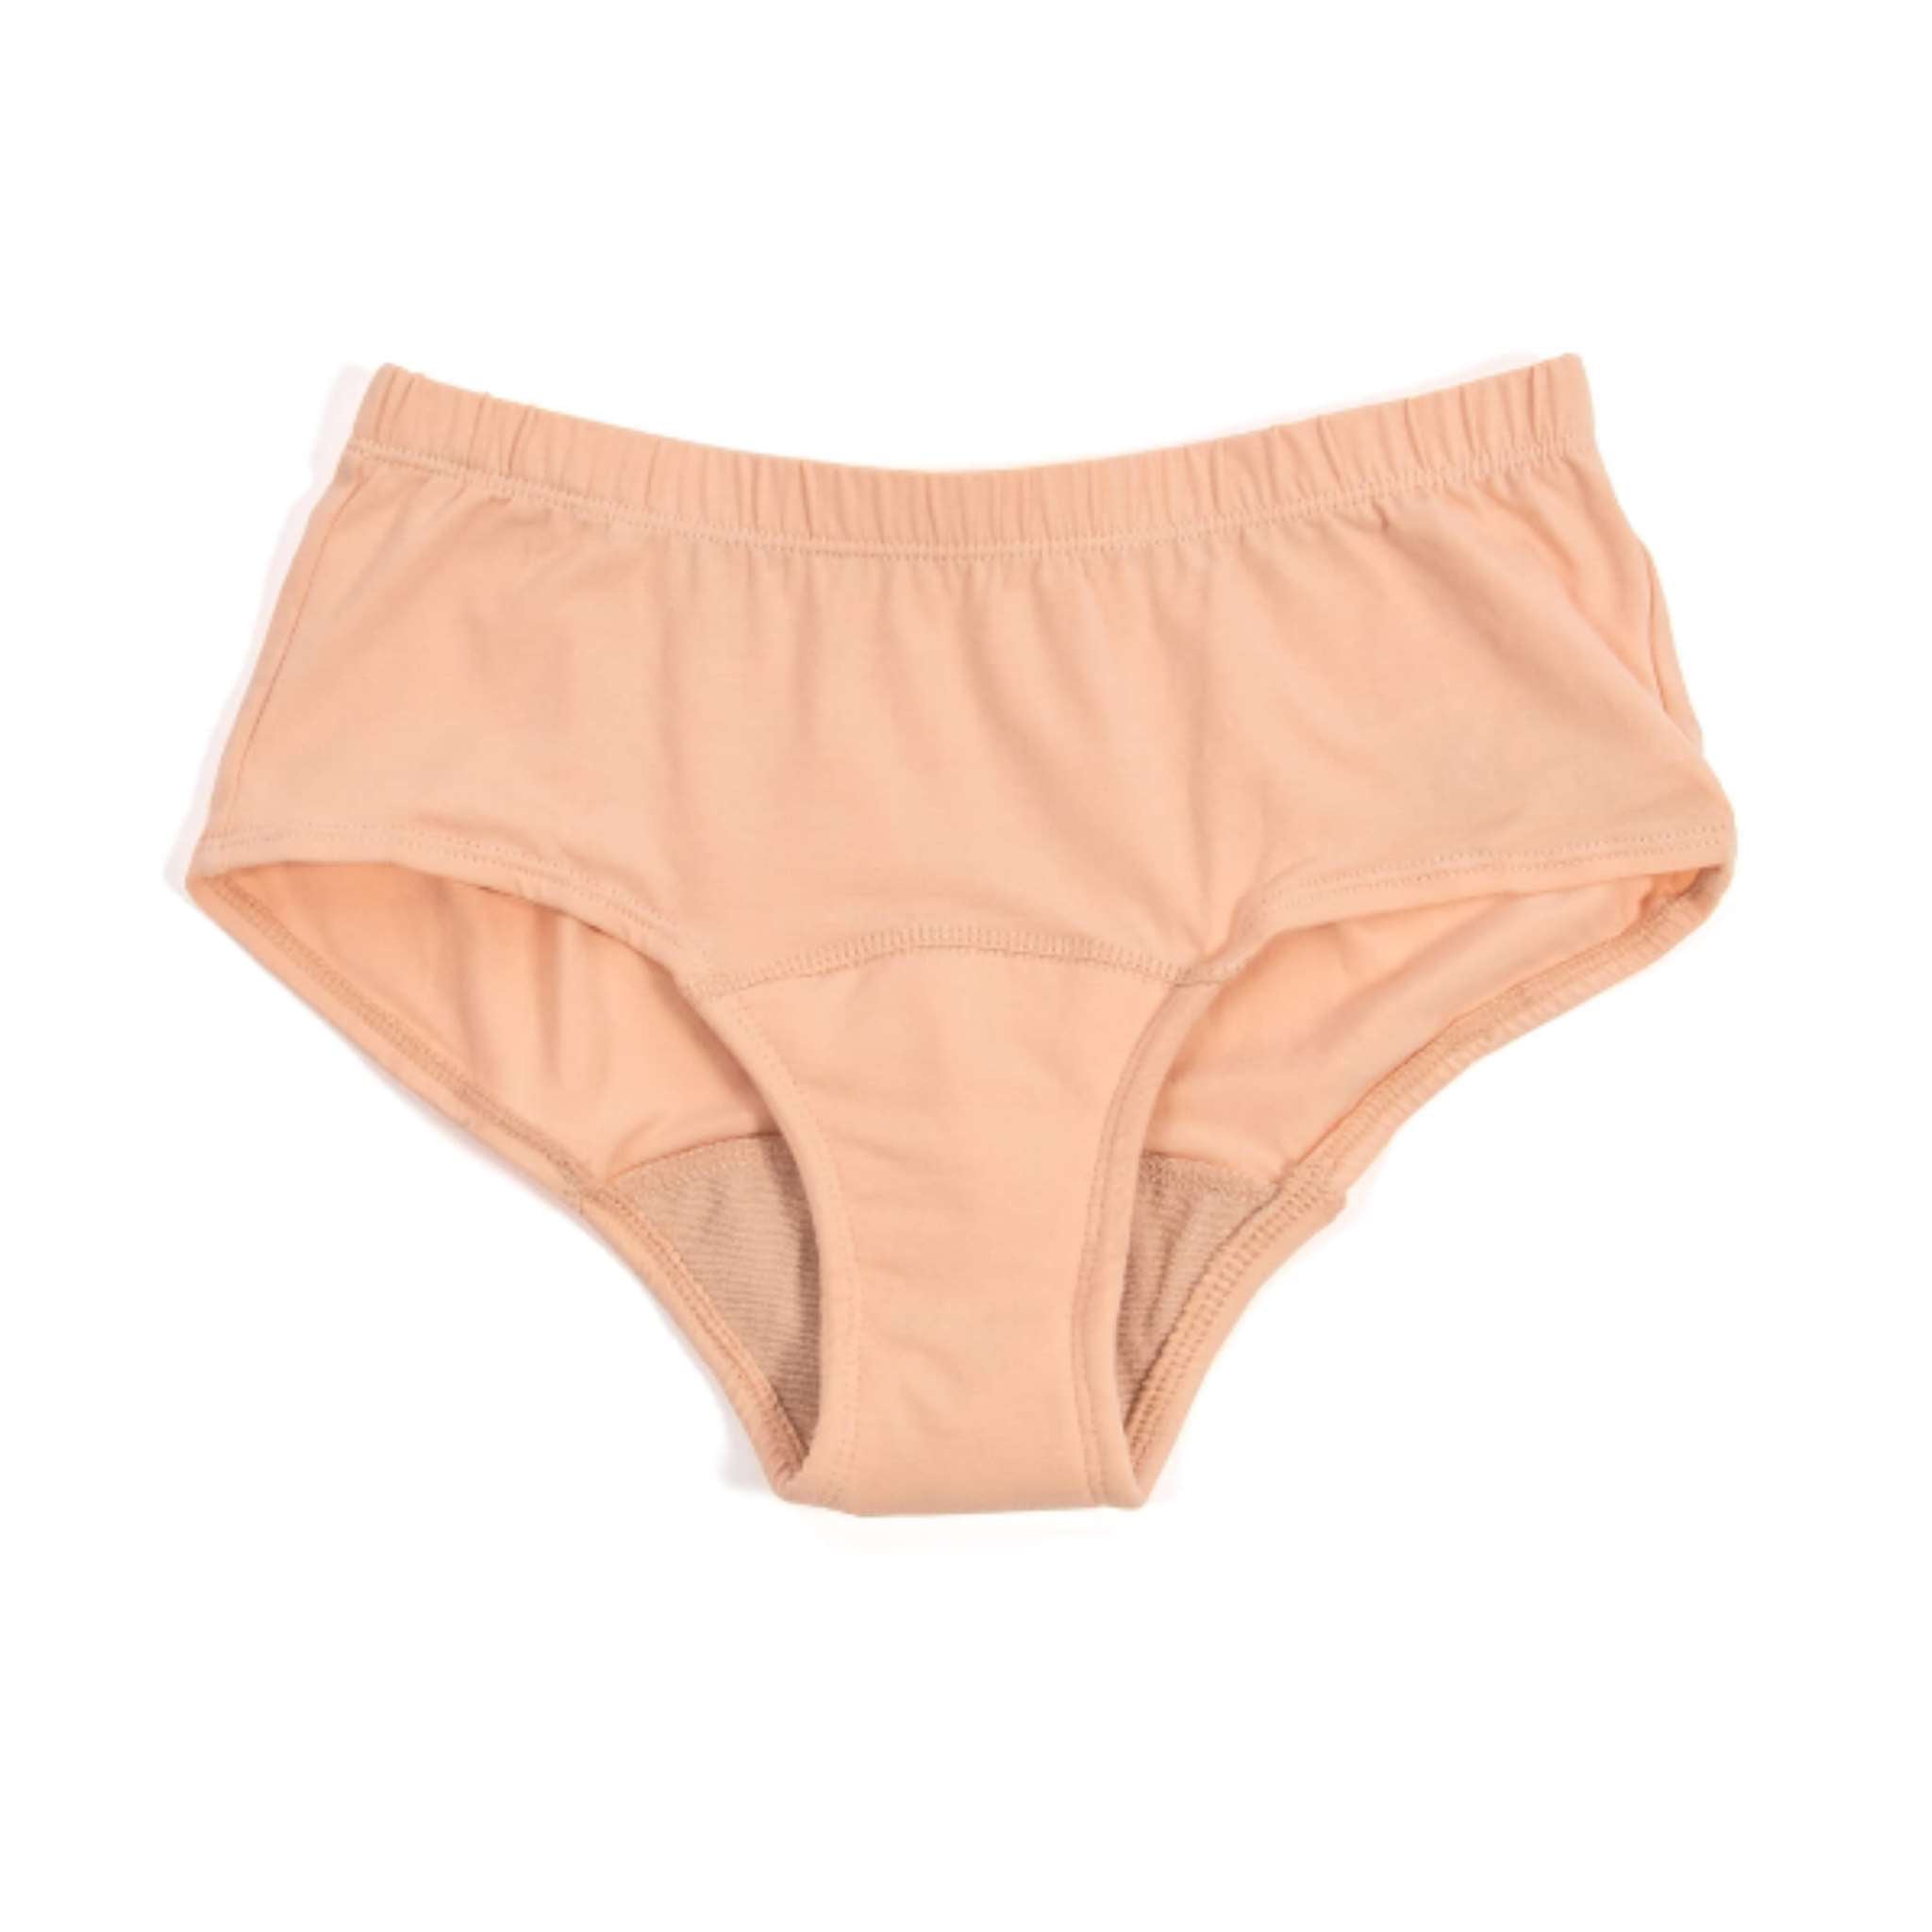 Conni Ladies Active - Beige from Aged CAre and Medical